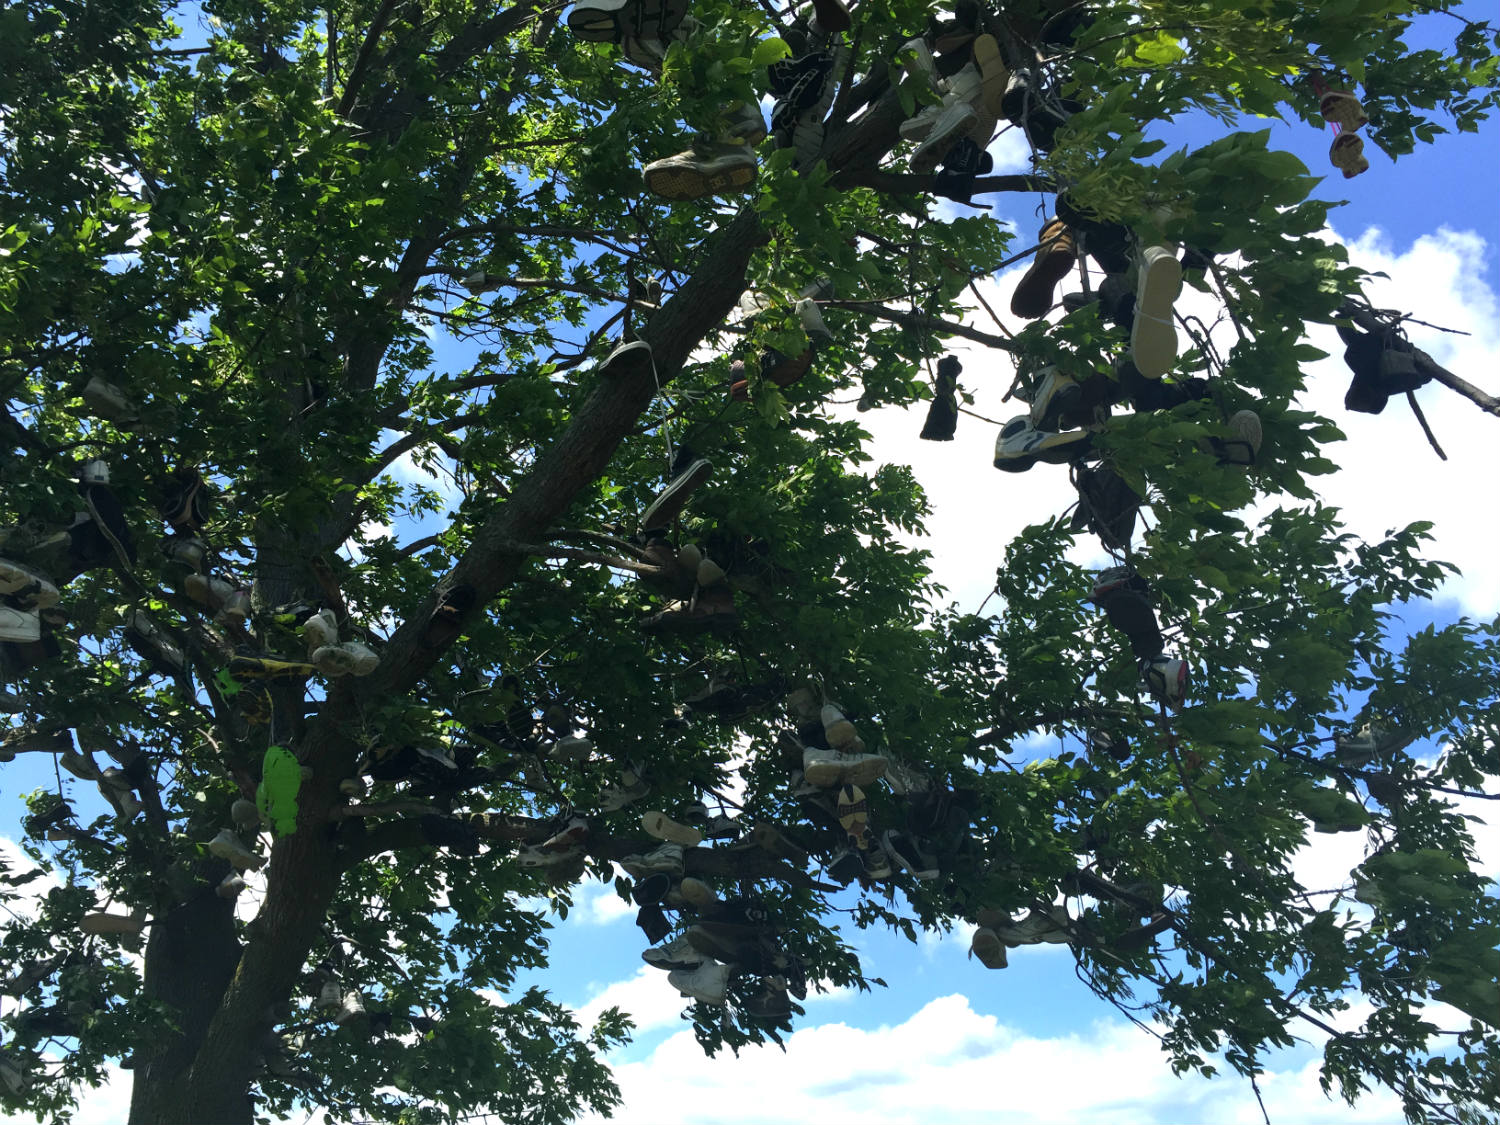 The Shoe Trees of Lyndonville, New York